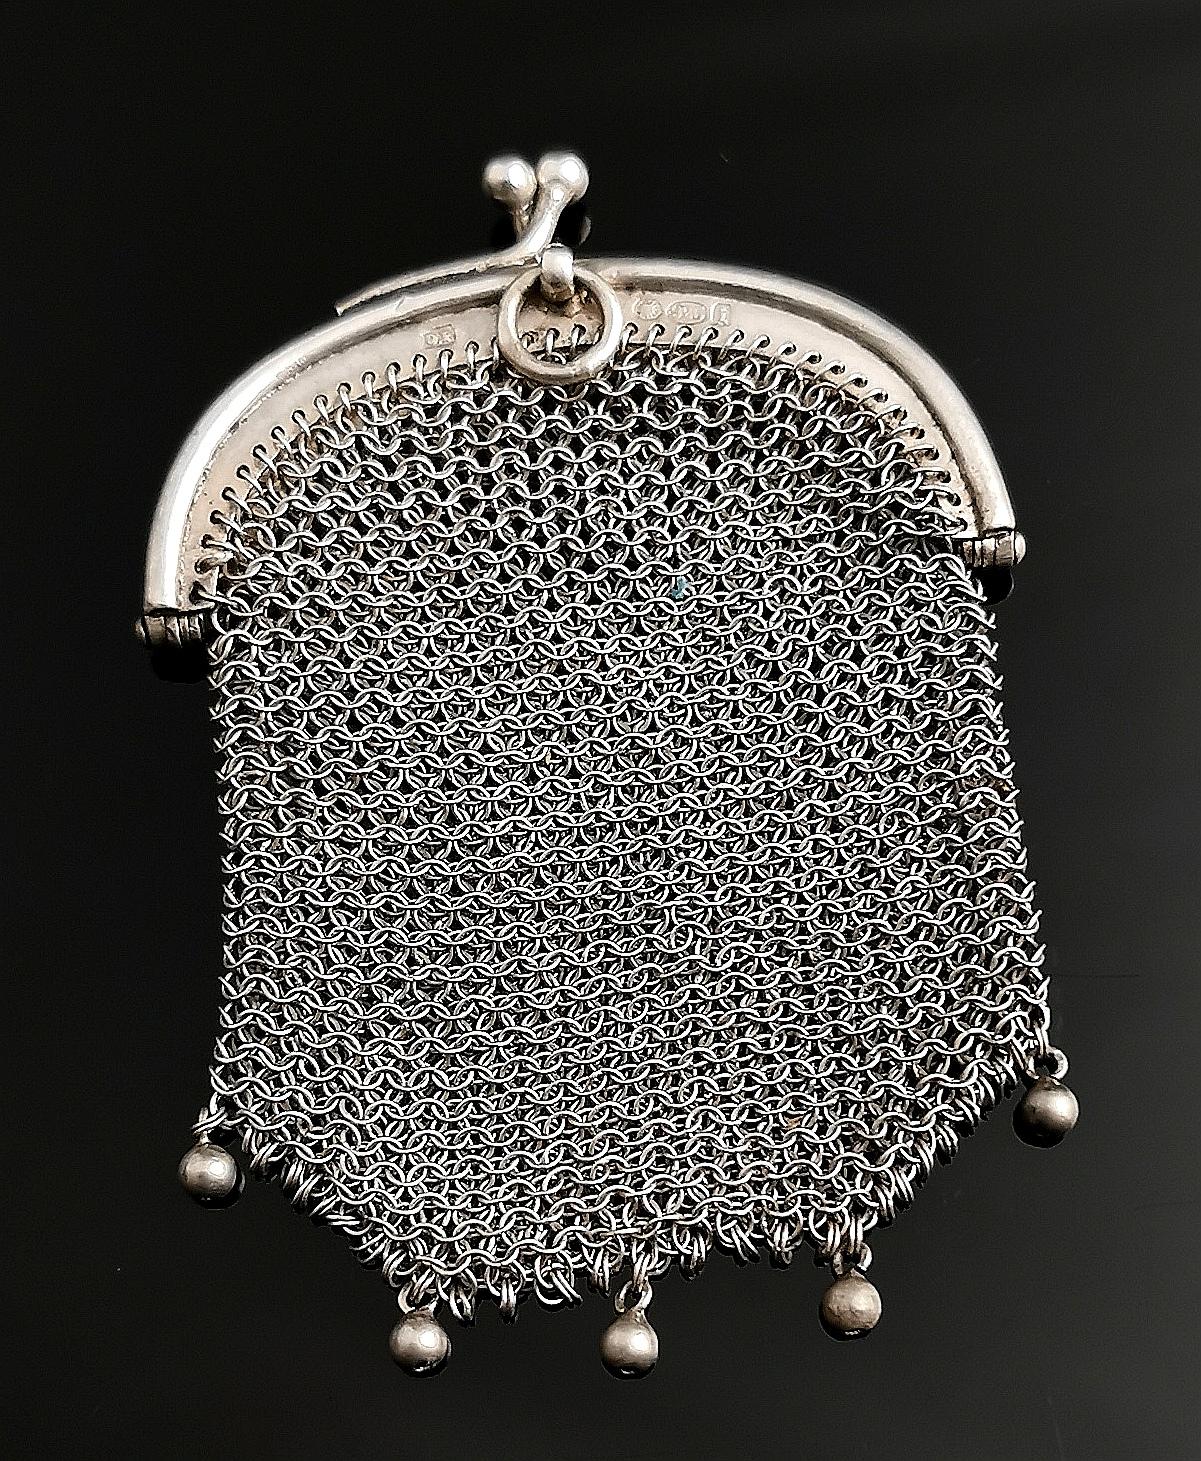 A stunning antique Swiss silver chatelaine purse.

The body is made up from intricately woven 925 sterling silver mesh and it has five little beads suspended from the bottom.

The purse has a silver frame with a kiss lock clasp fastener.

There is a